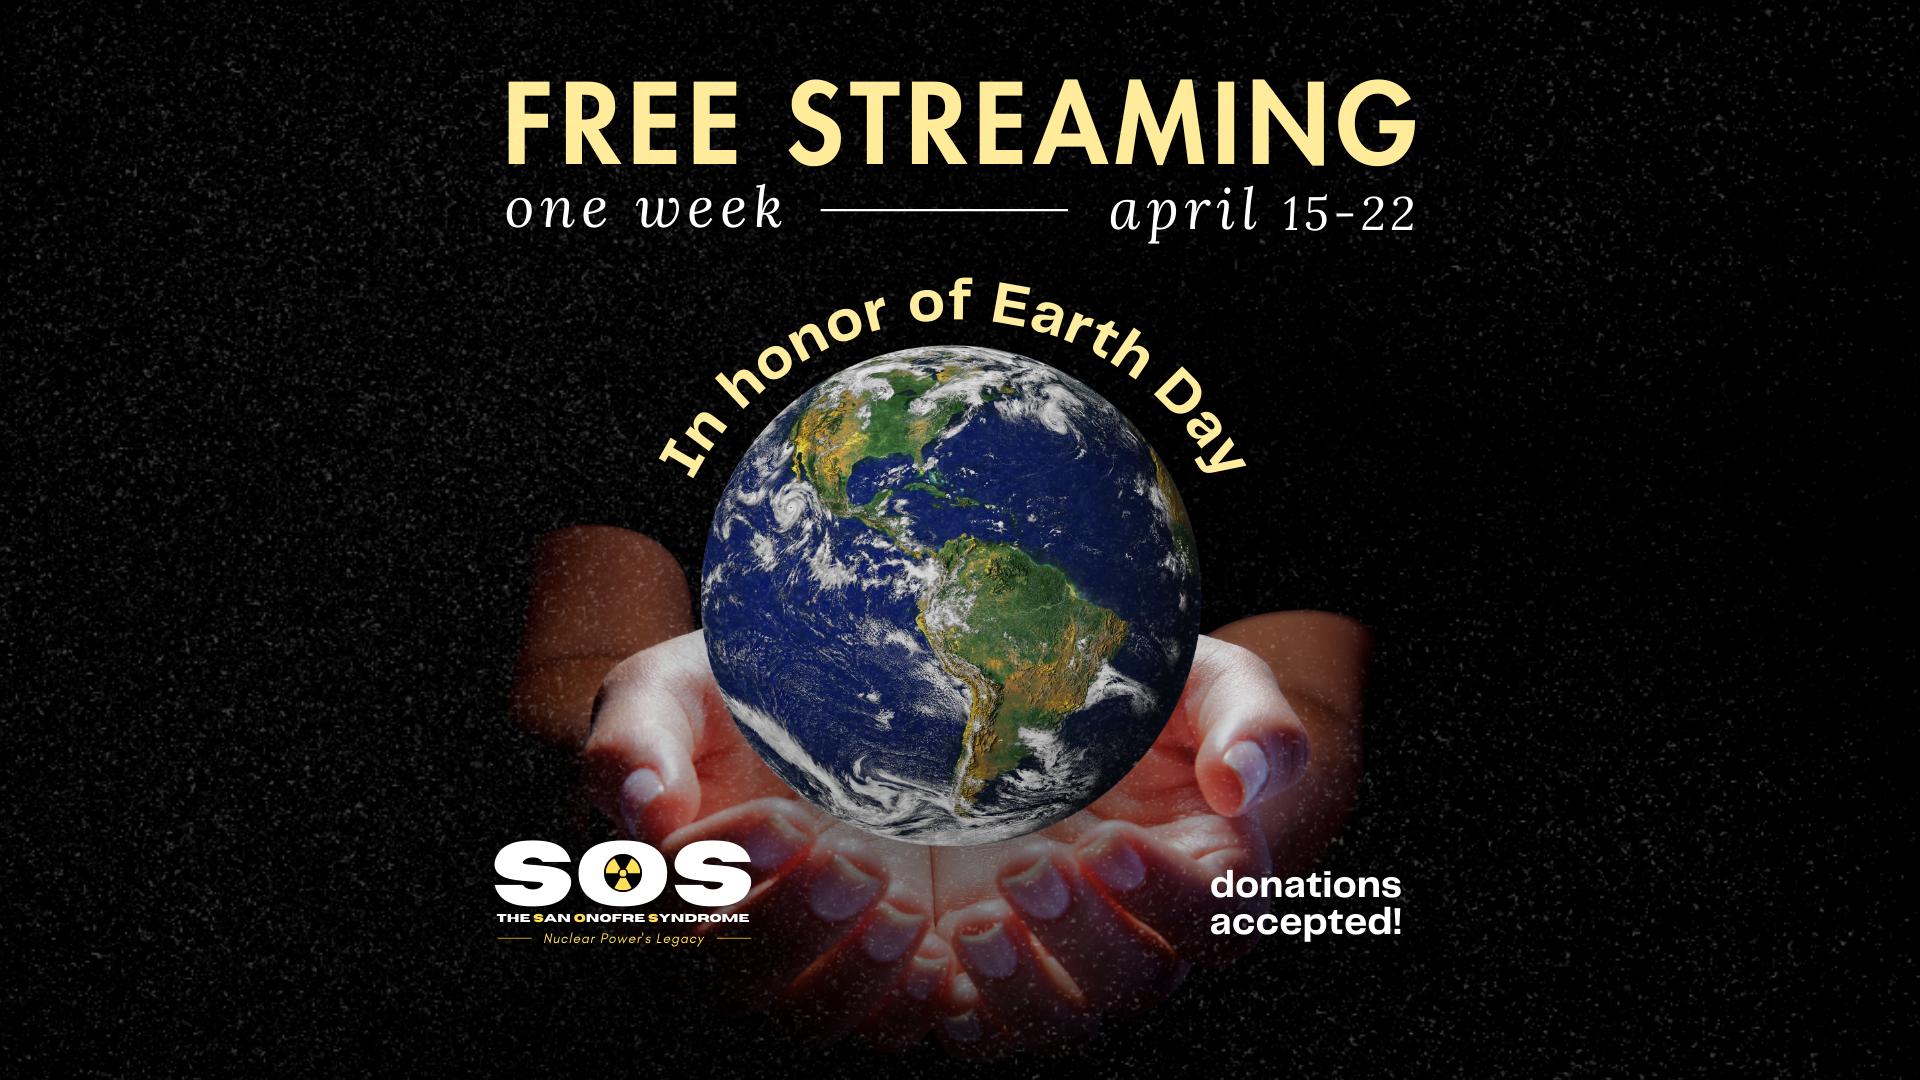 SOS ONE WEEK FREE STREAMING - IN HONOR OF EARTH DAY